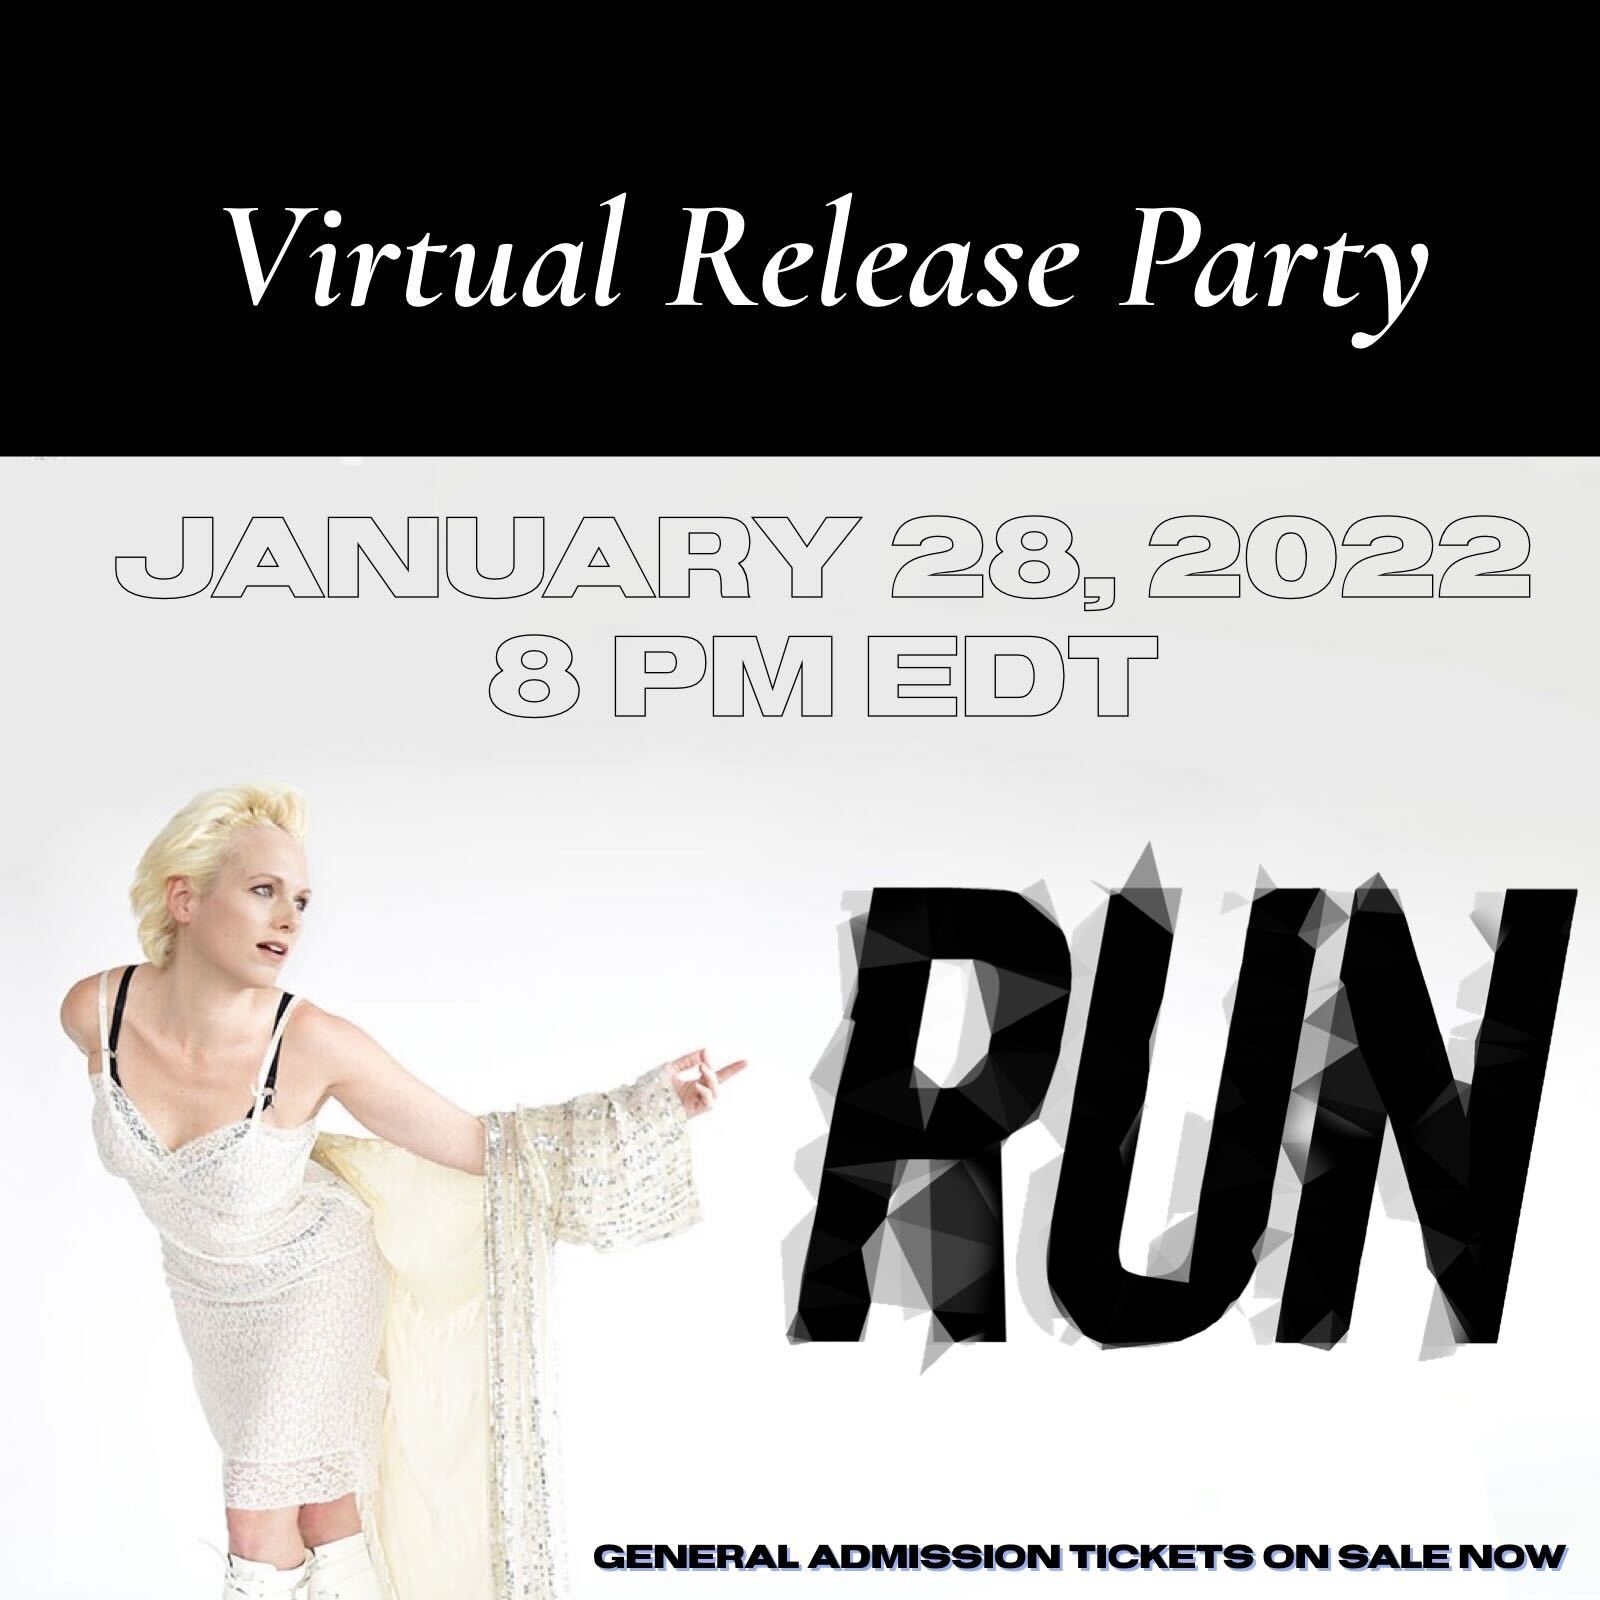 IVA's Virtual Single Release Party, Online Event